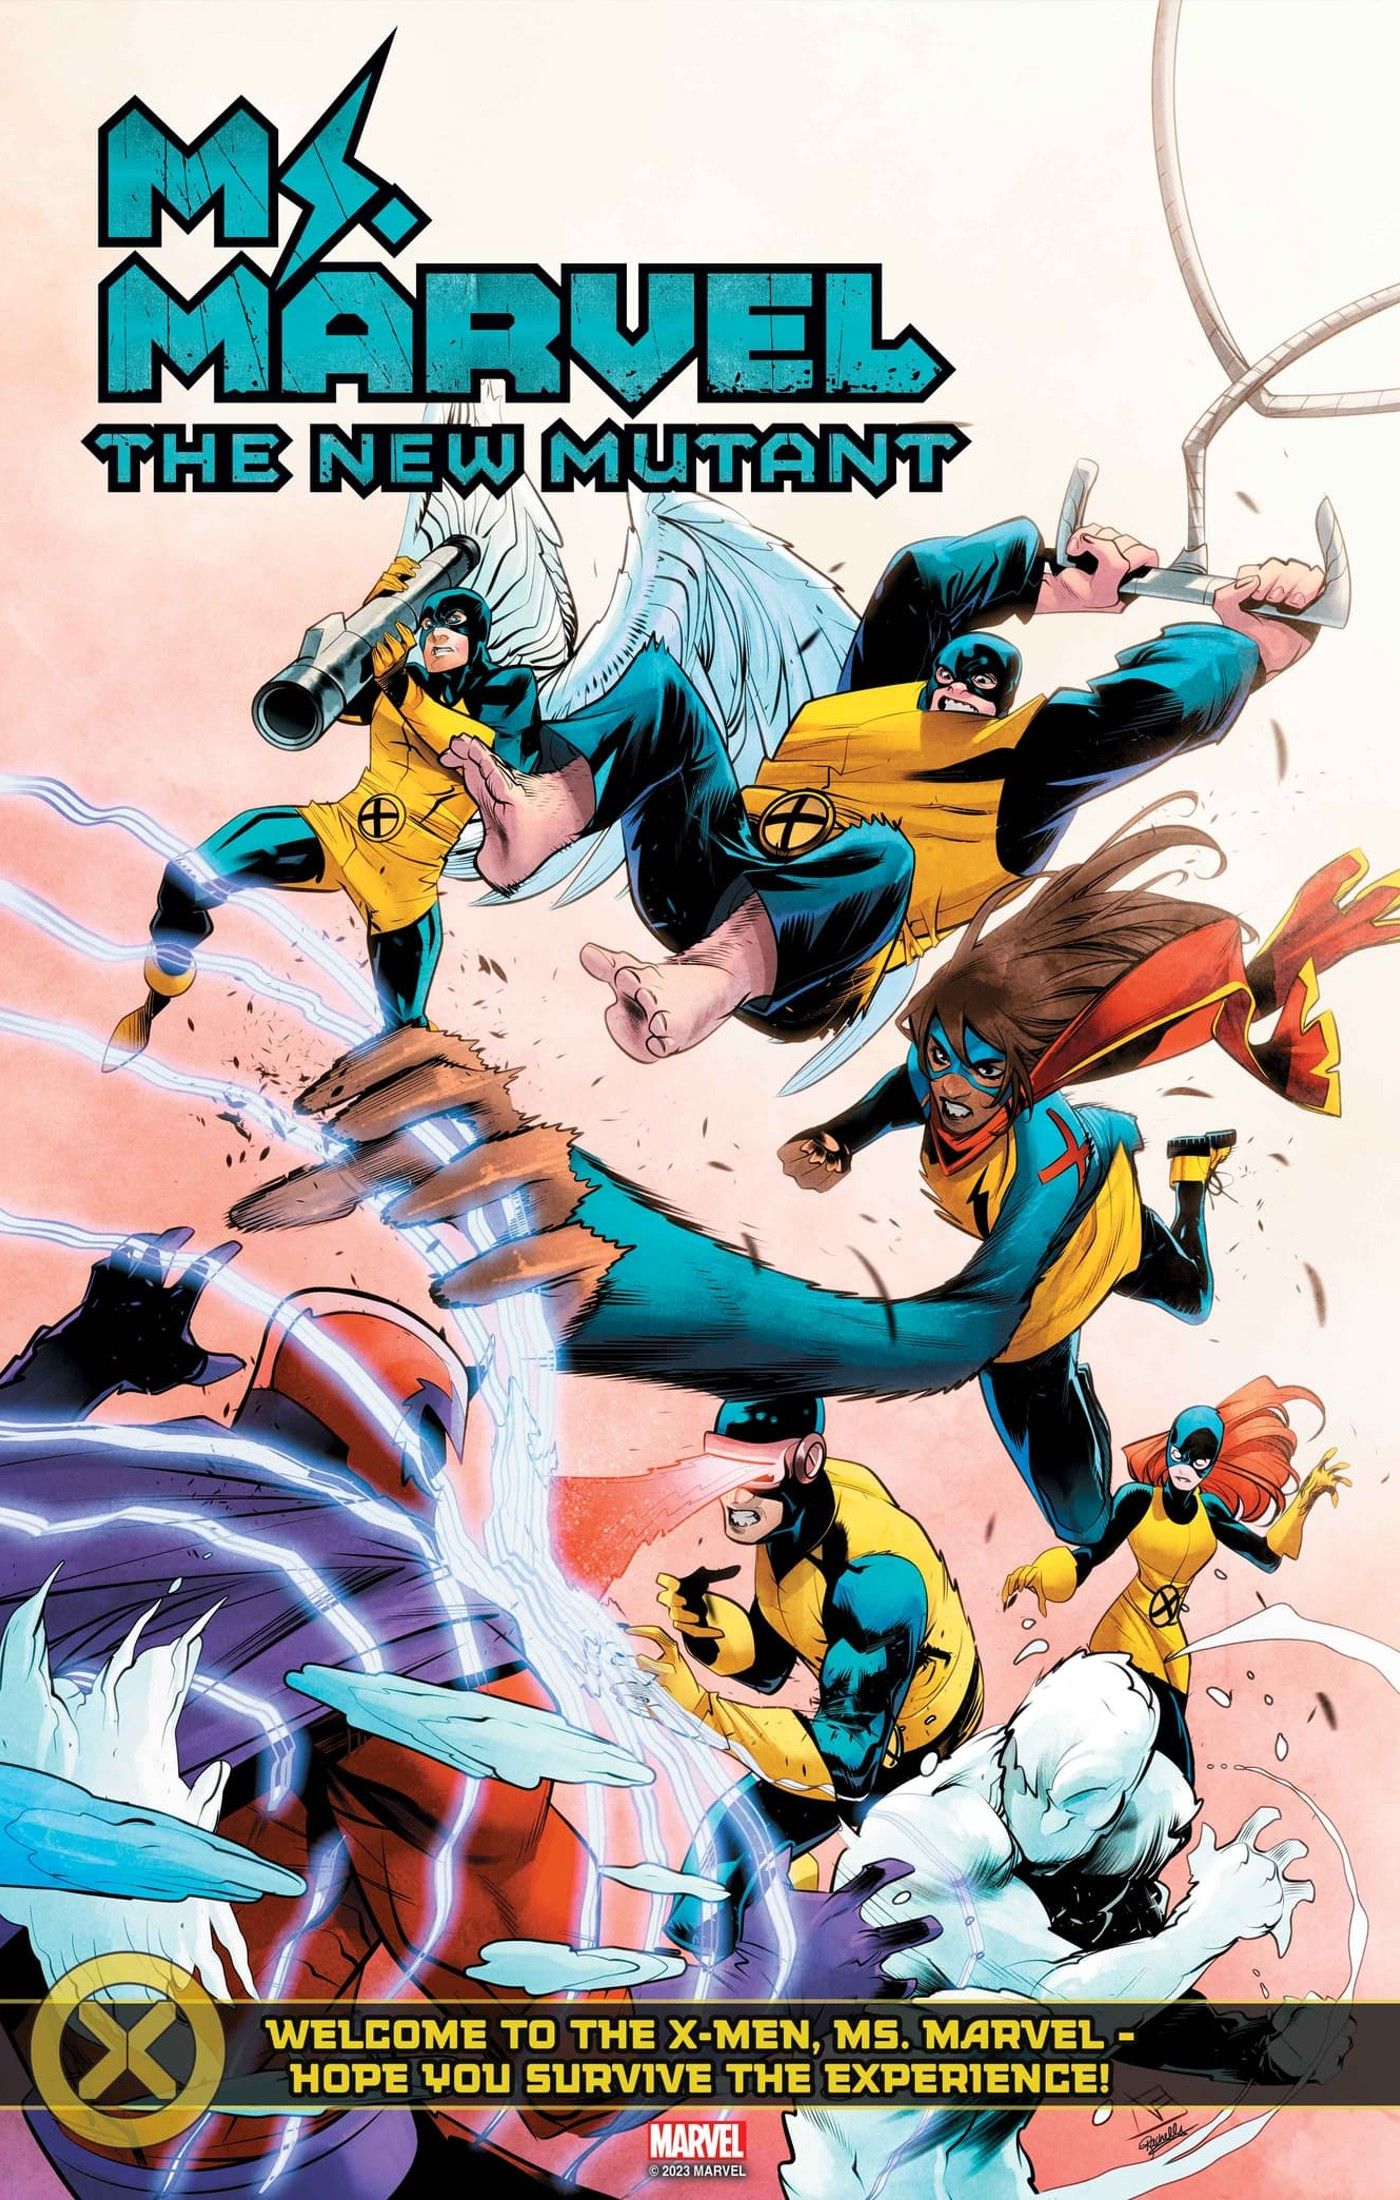 Cover of the New Mutant variant of Ms Marvel-1